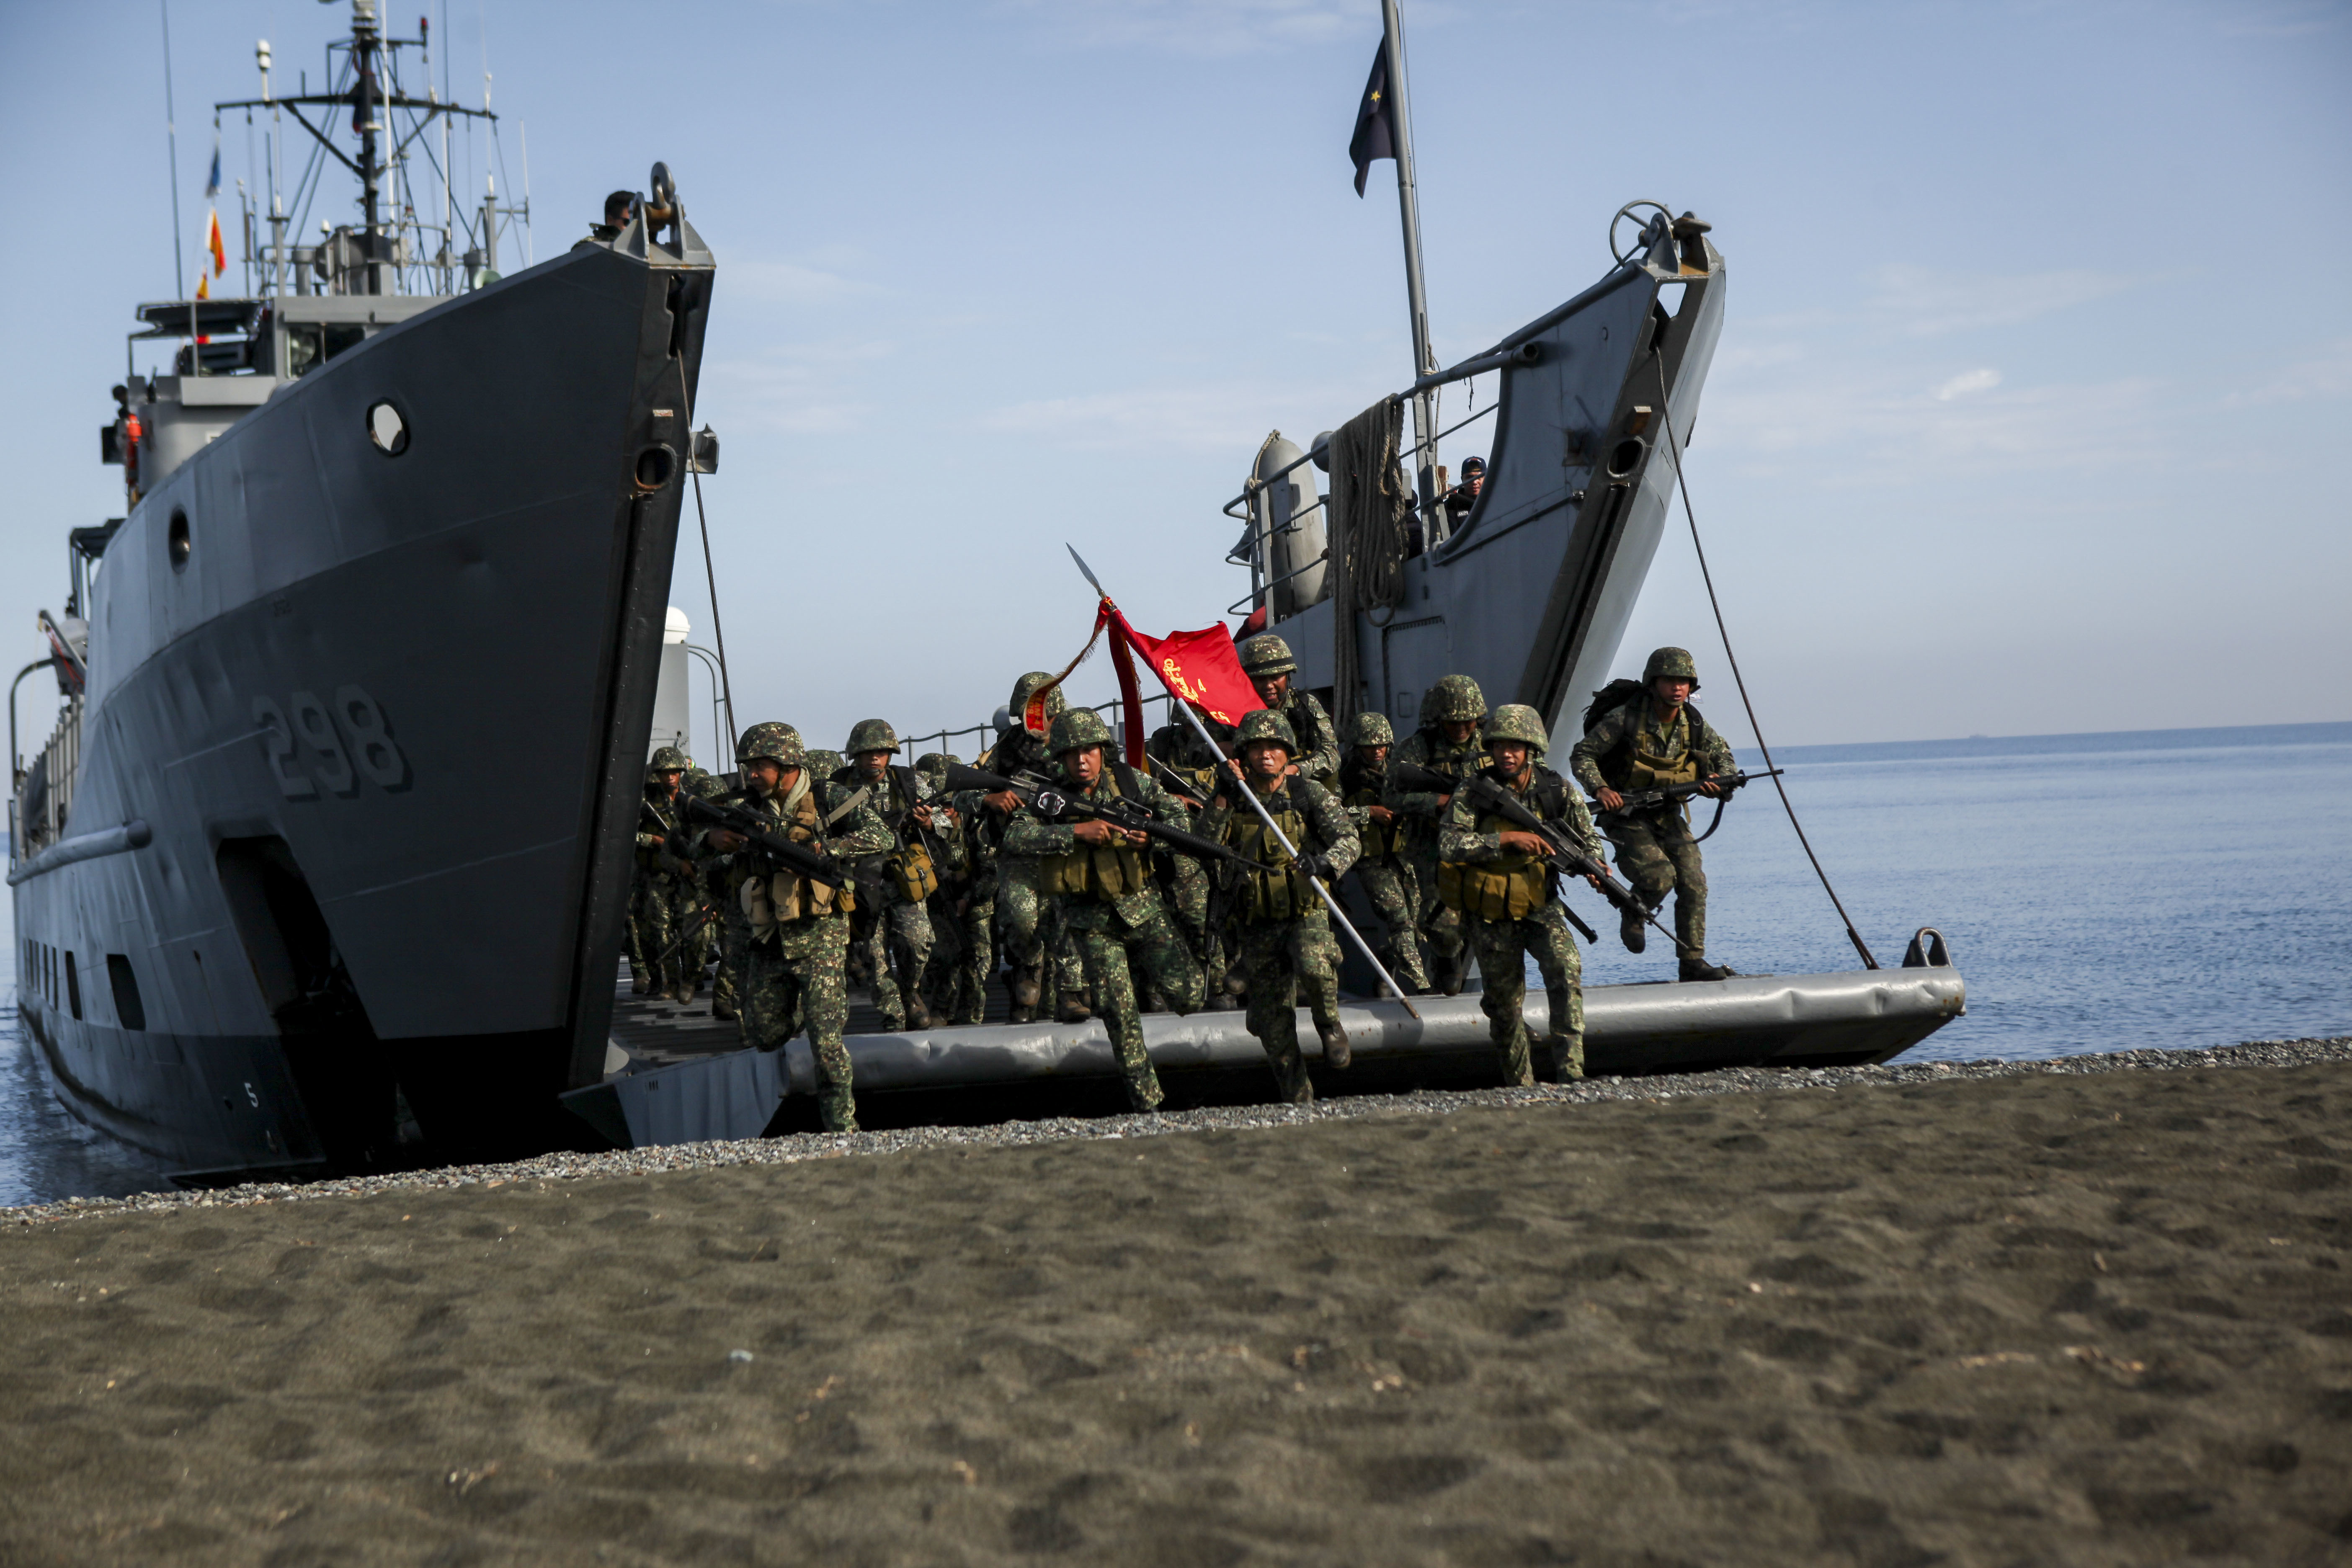 Philippine marines with the Joint Rapid Reaction Force (JRRF), conduct an amphibious landing utilizing Philippine logistical navy ships to seize a scenario-based objective as part of Exercise Balikatan 2016. US Marine Corps Photo